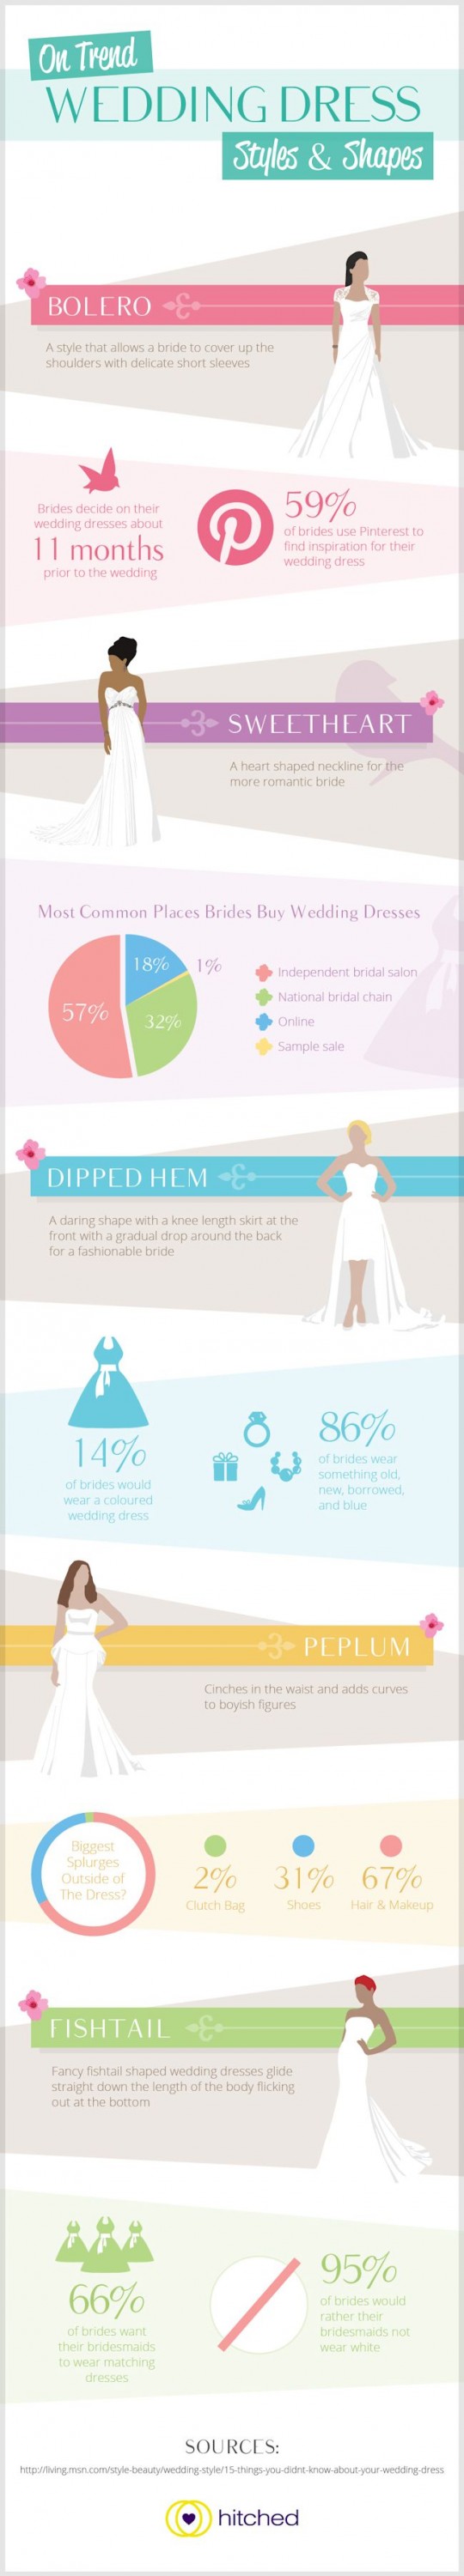 Wedding Dress Styles and Shapes